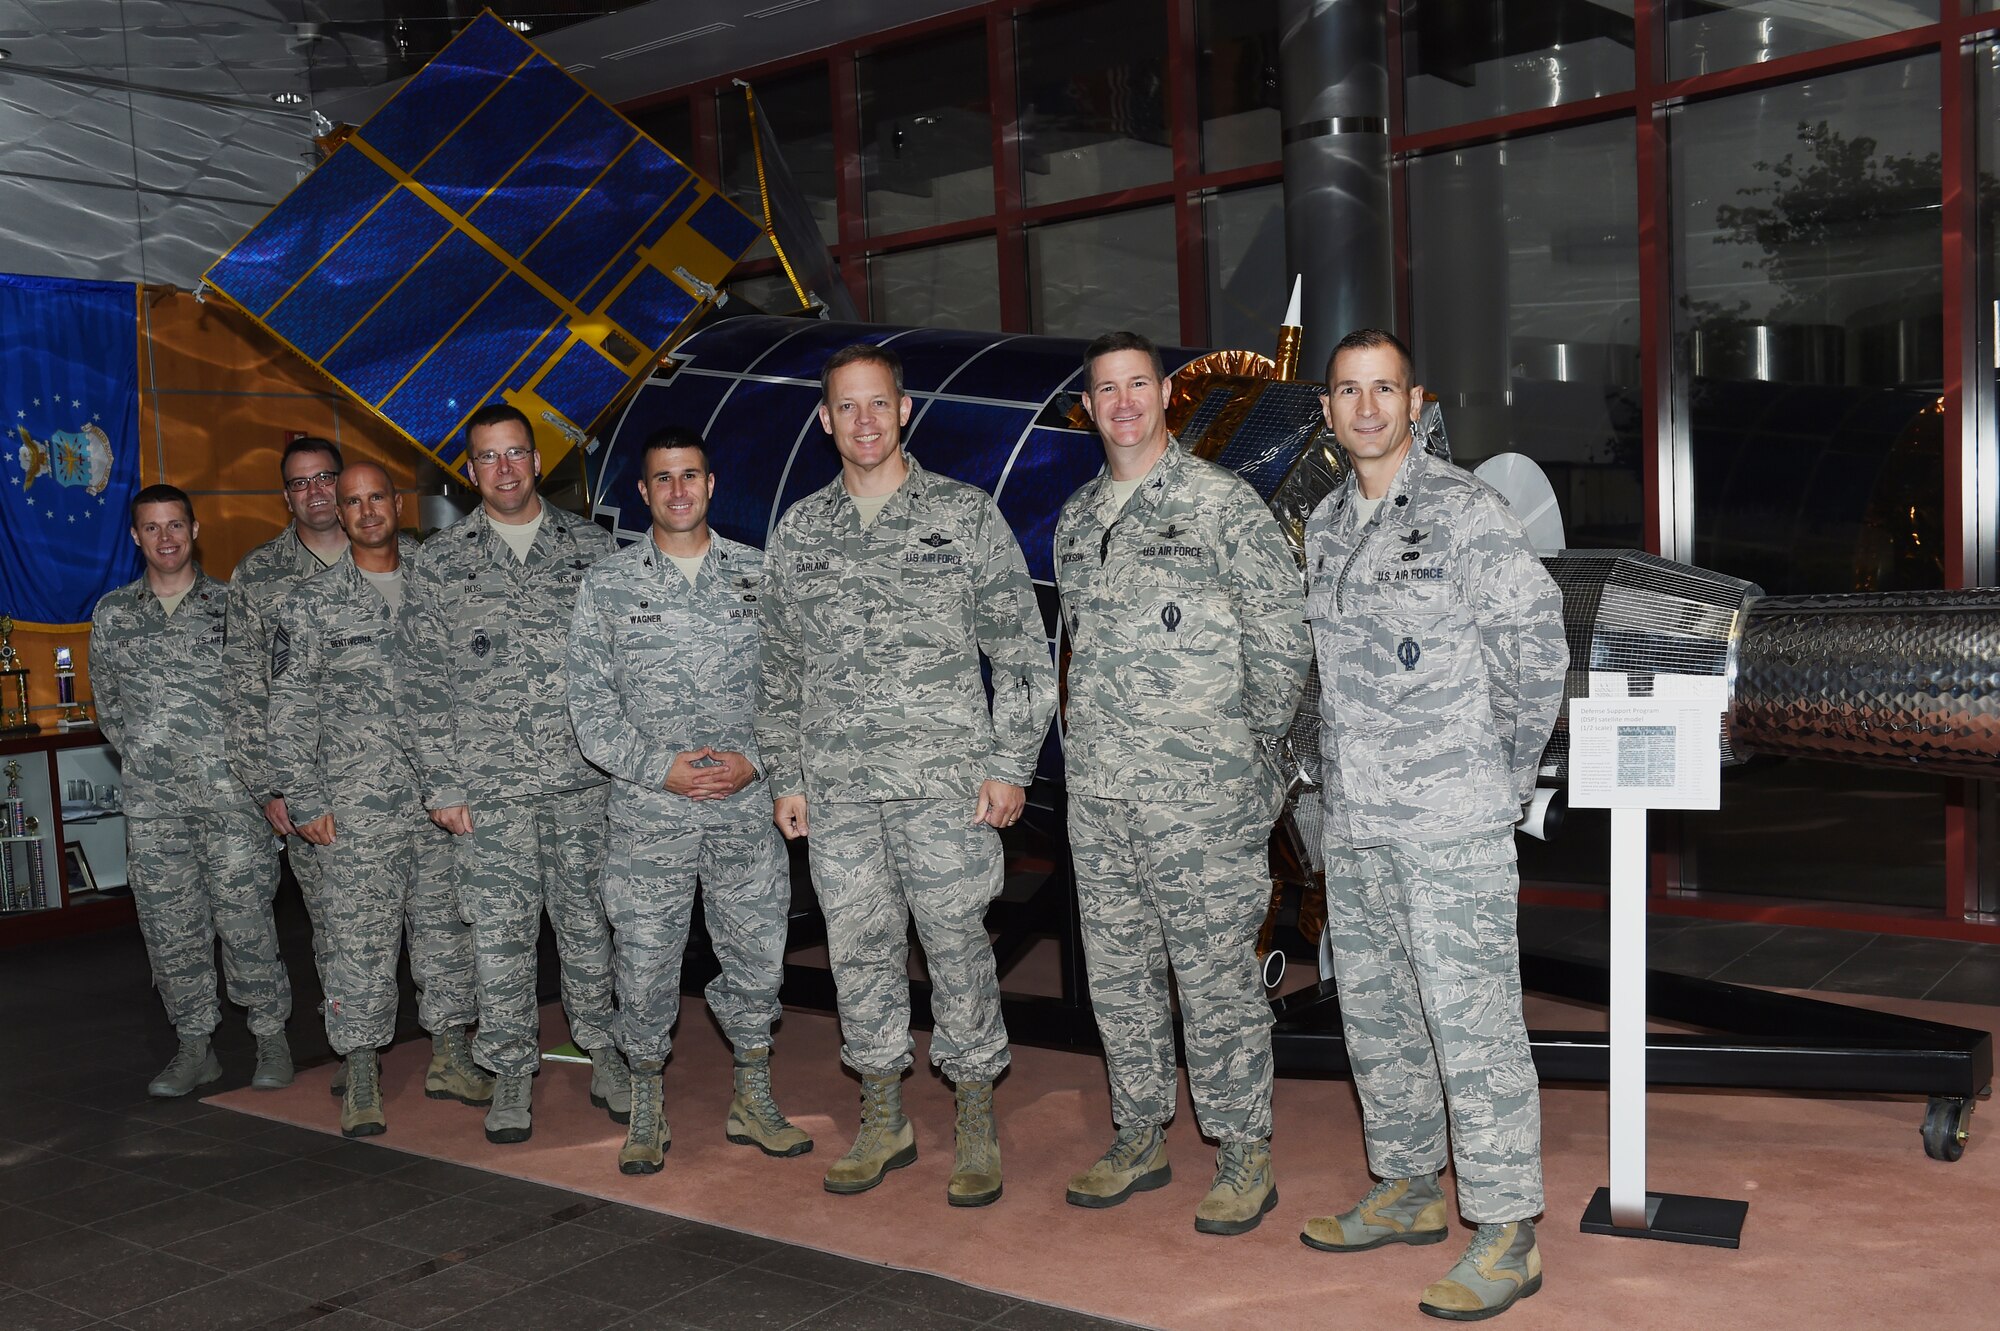 Brig. Gen. Steven Garland, 14th Air Force vice commander, third from right, tours the Mission Control Station with Team Buckley leaders Sept. 22, 2014, on Buckley Air Force Base, Colo. Buckley is Garland’s first stop on a tour of Air Force Space Command bases after becoming vice commander of the 14th AF in July 2014. (U.S. Air Force photo by Airman 1st Class Samantha Saulsbury/Released)